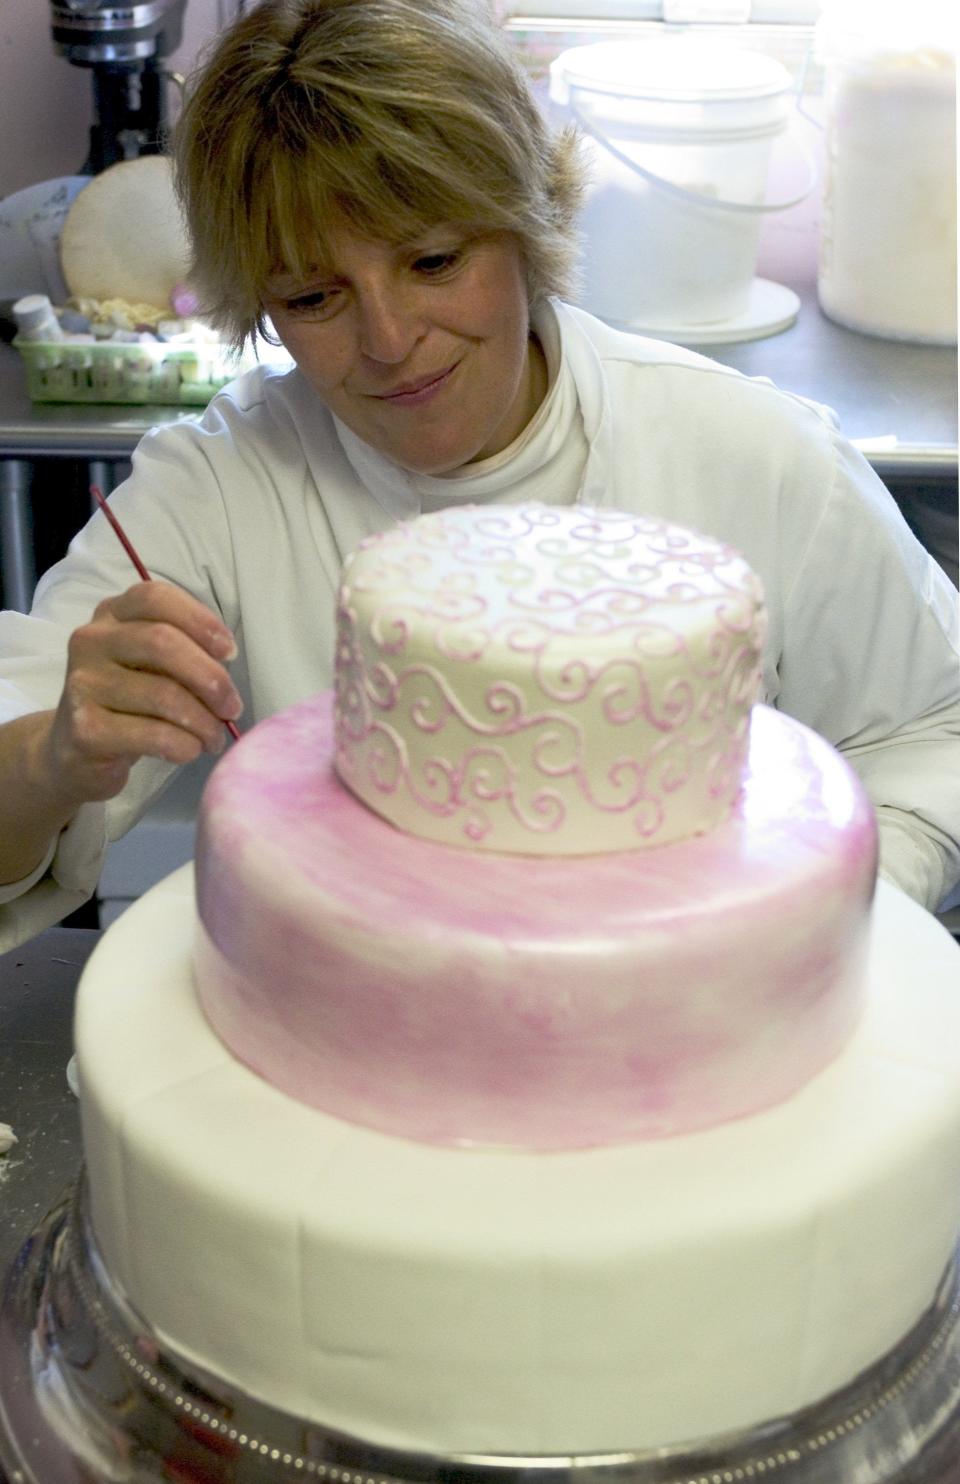 Pastry chef Lisa Raffael of Falmouth, who has been crafting cakes for decades, works on a three-tier pearlized fondant wedding cake early in her career.